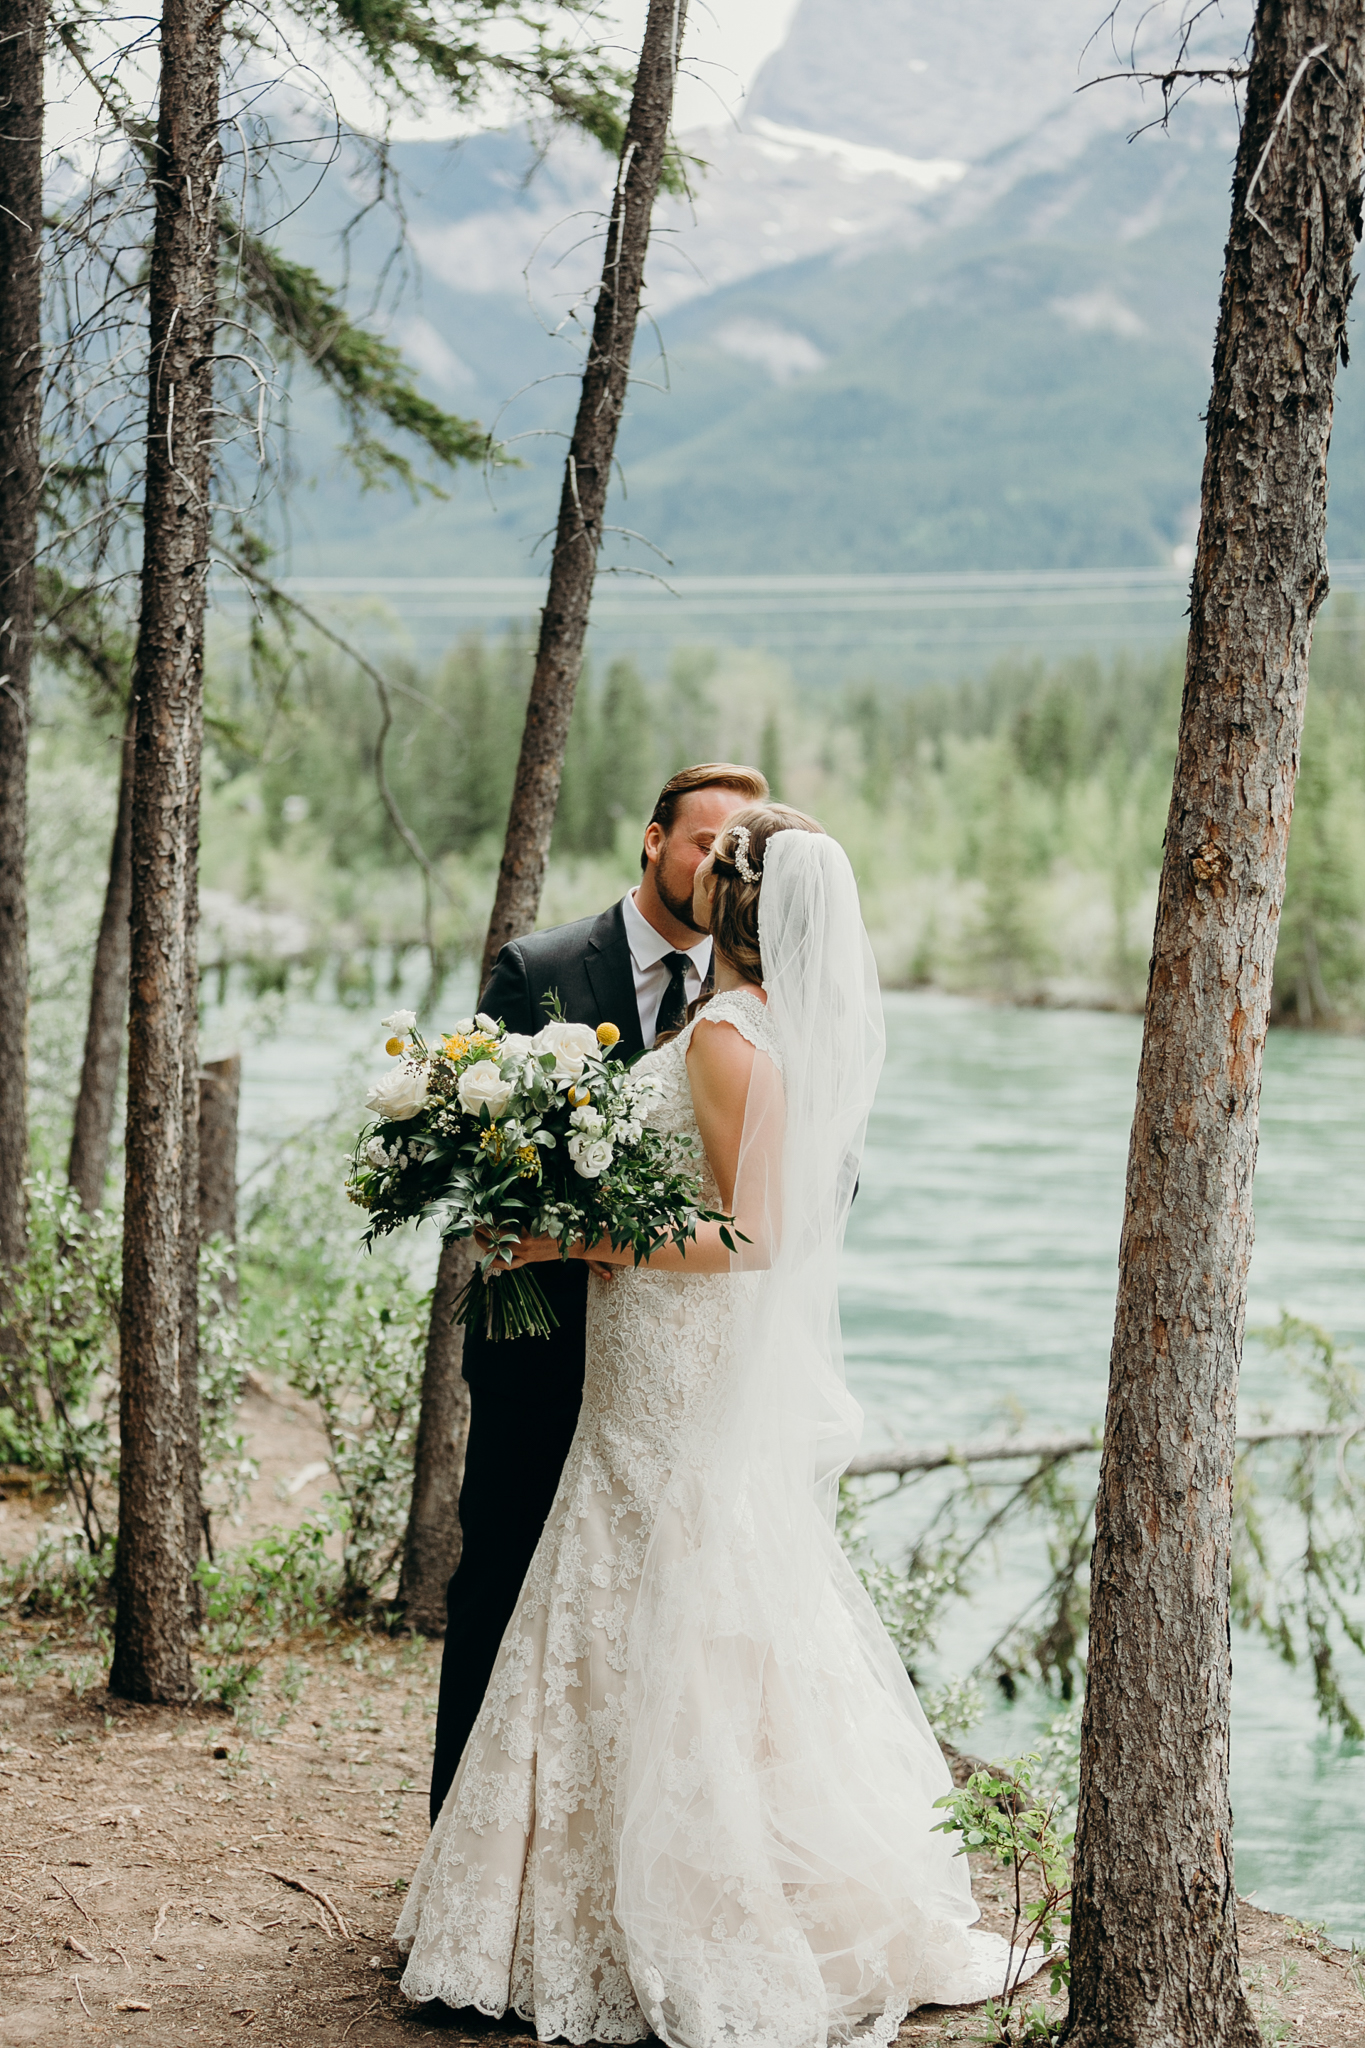 Bride and groom embrace romantic wedding photography MN destination wedding photographer Canmore AB